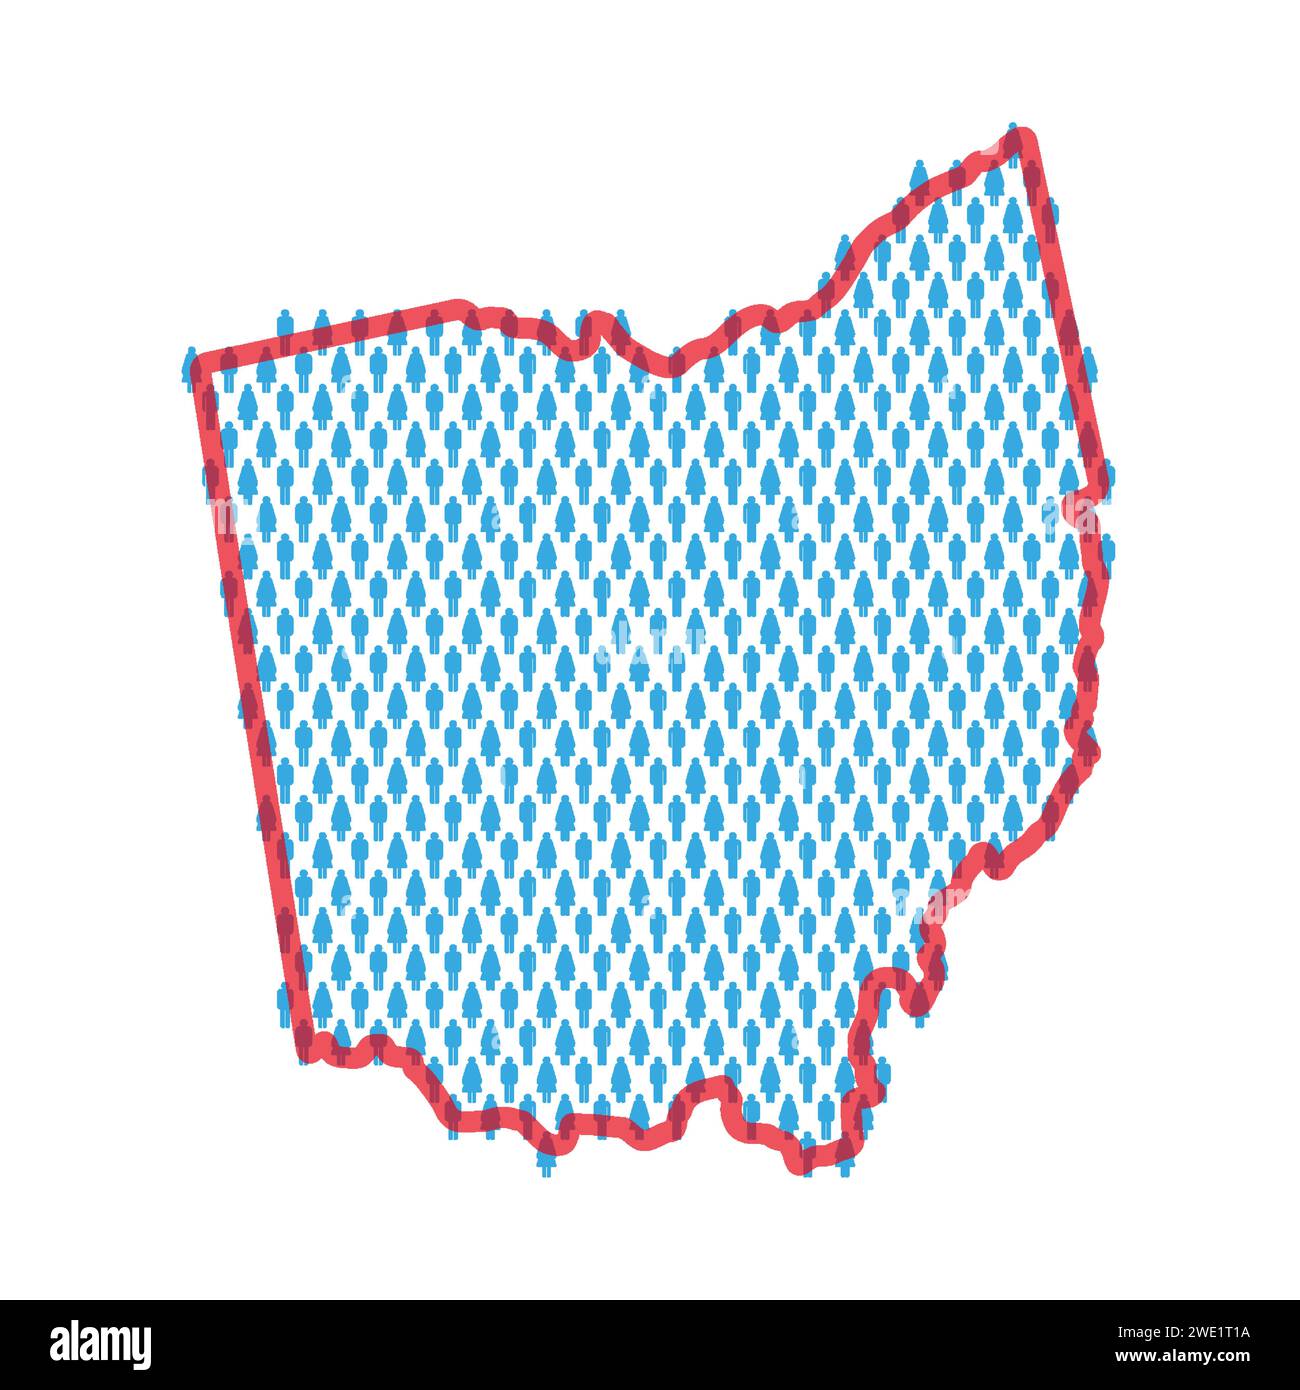 Ohio population map. Stick figures people map with bold red translucent state border. Pattern of men and women icons. Isolated vector illustration. Ed Stock Vector